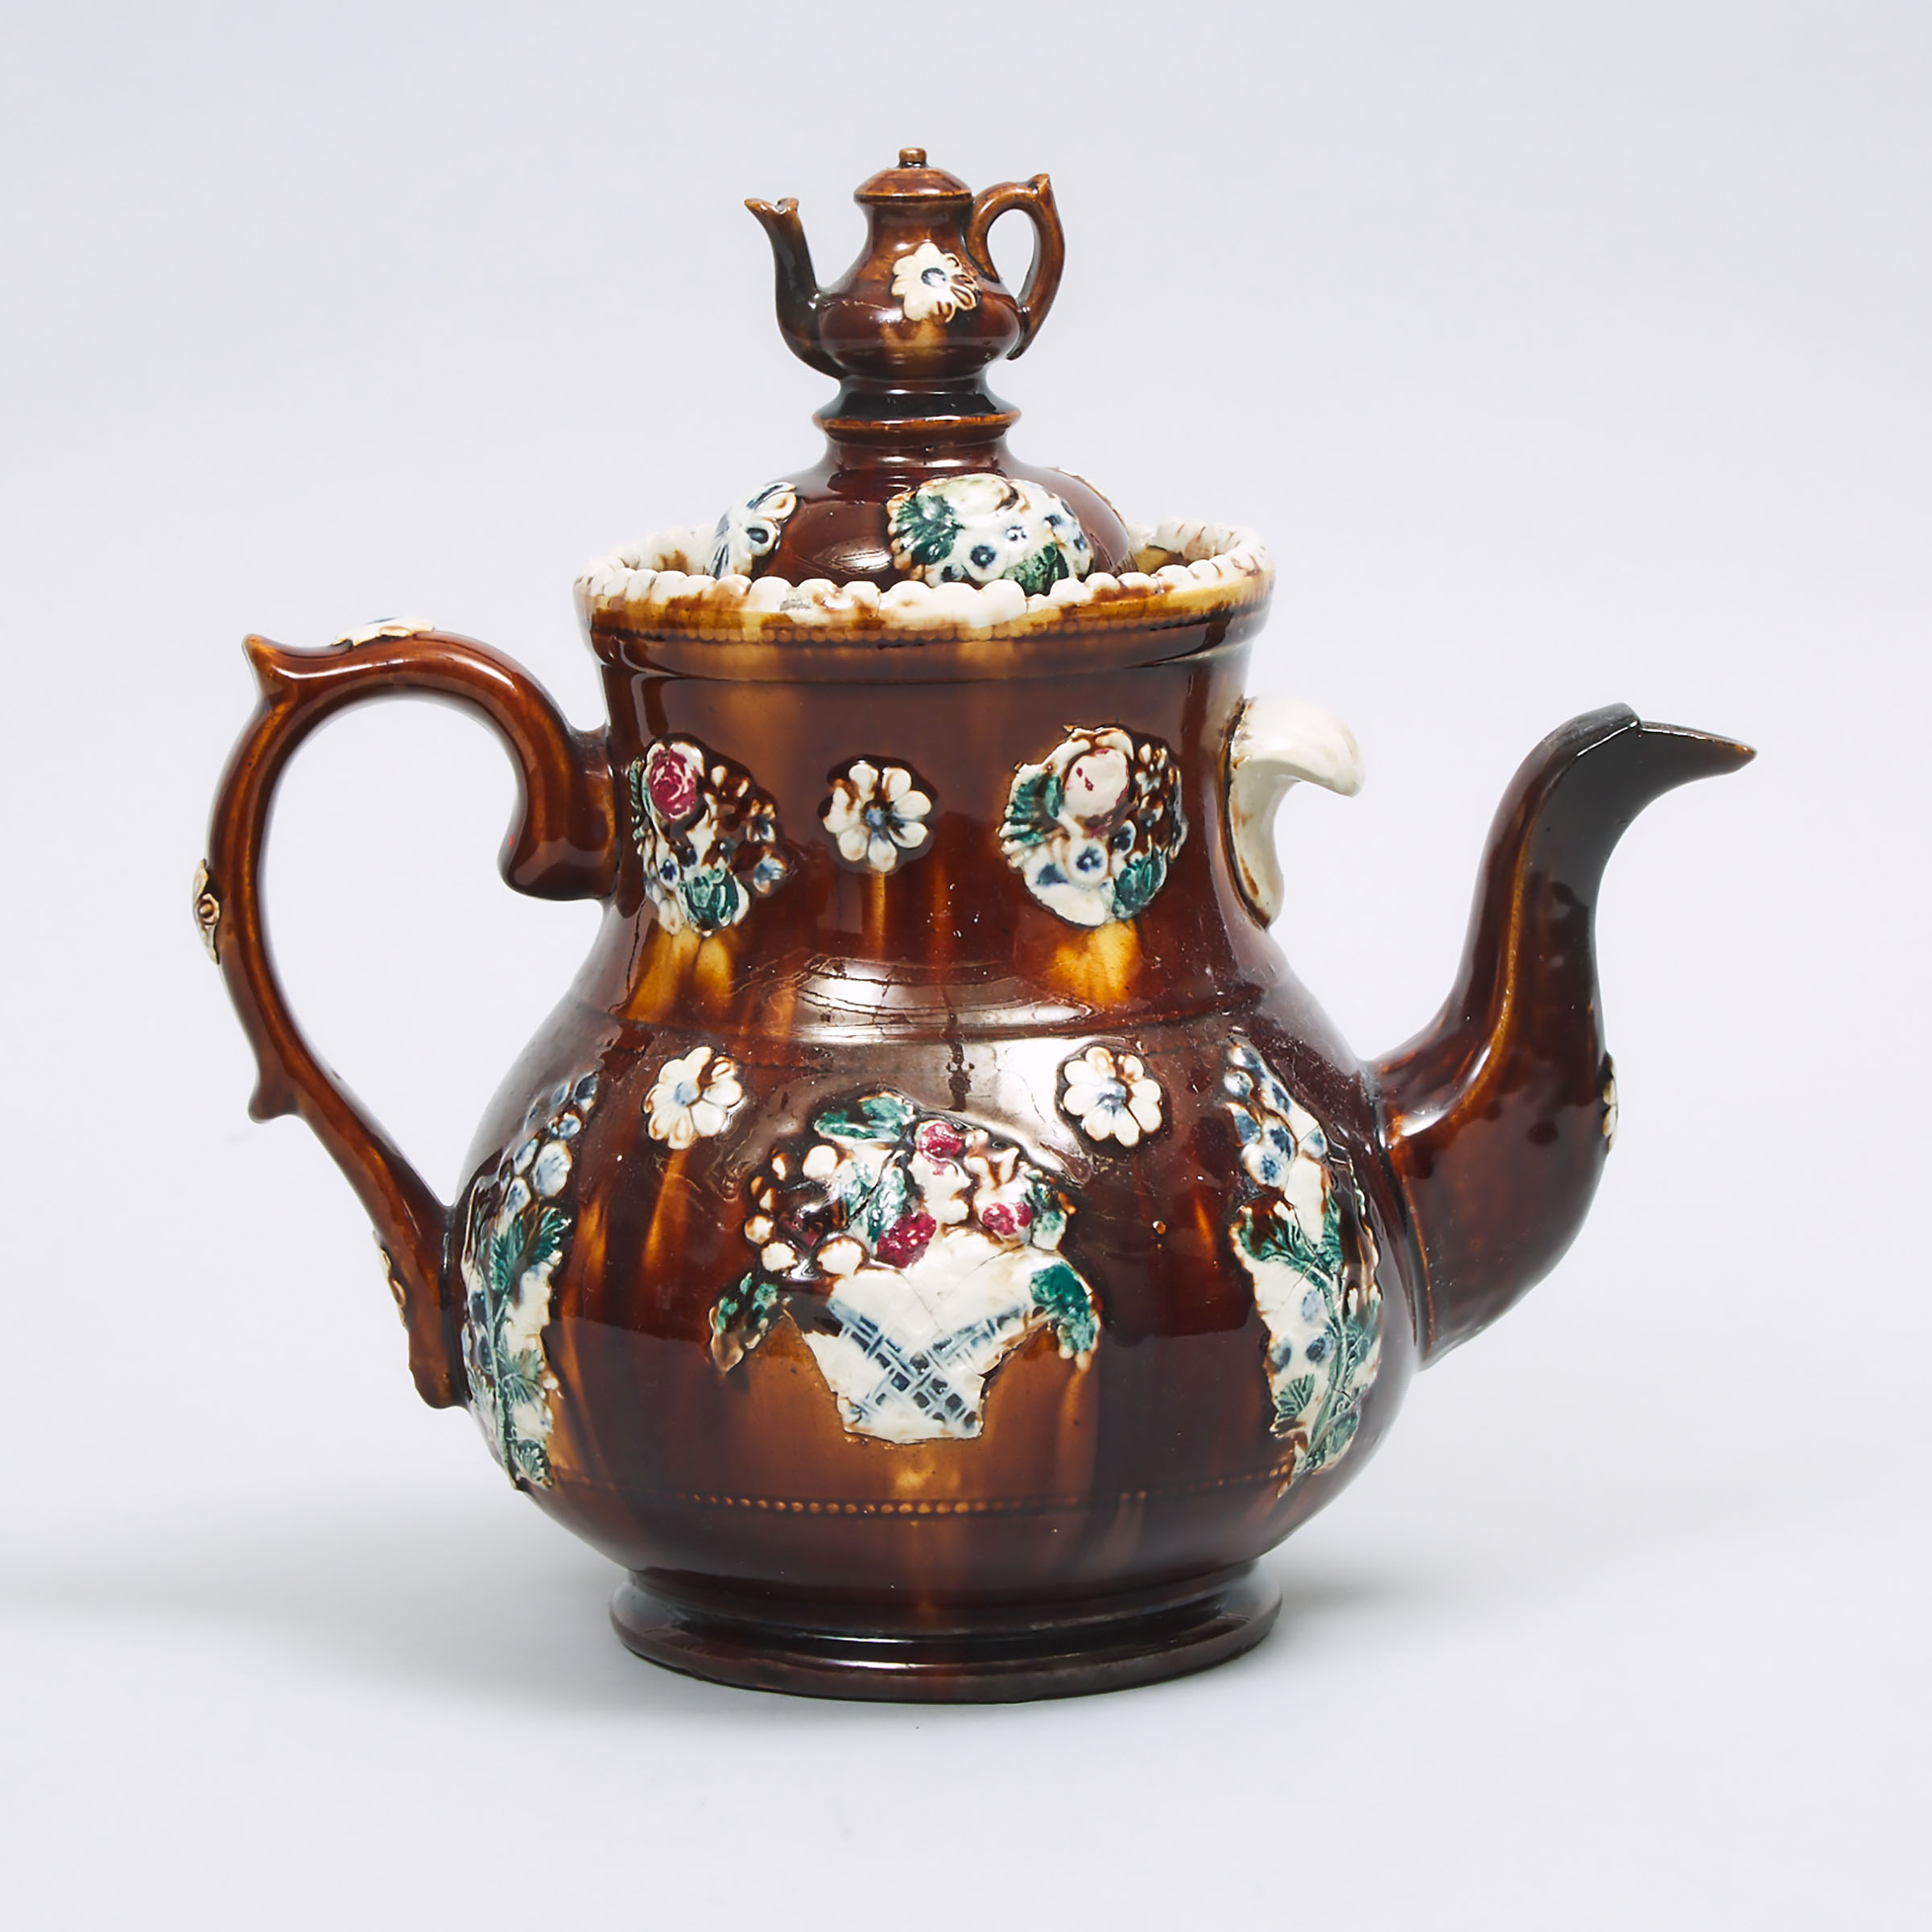 Staffordshire Barge Teapot, 1901